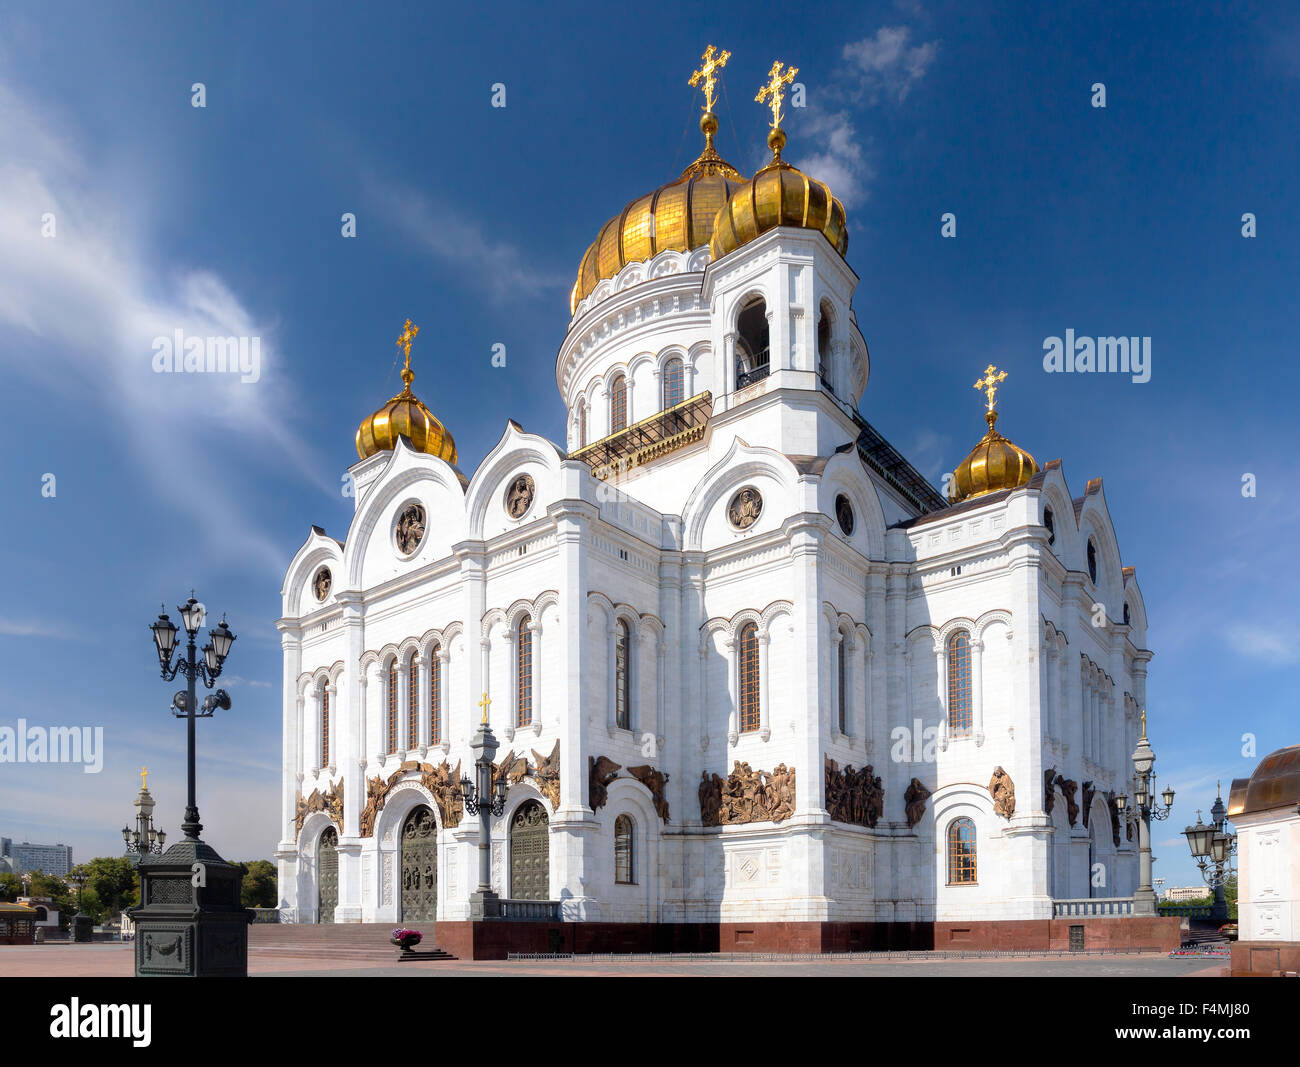 The Cathedral of Christ the Saviour in Moscow, Russia. The current church is the second to stand on this site. The original chur Stock Photo